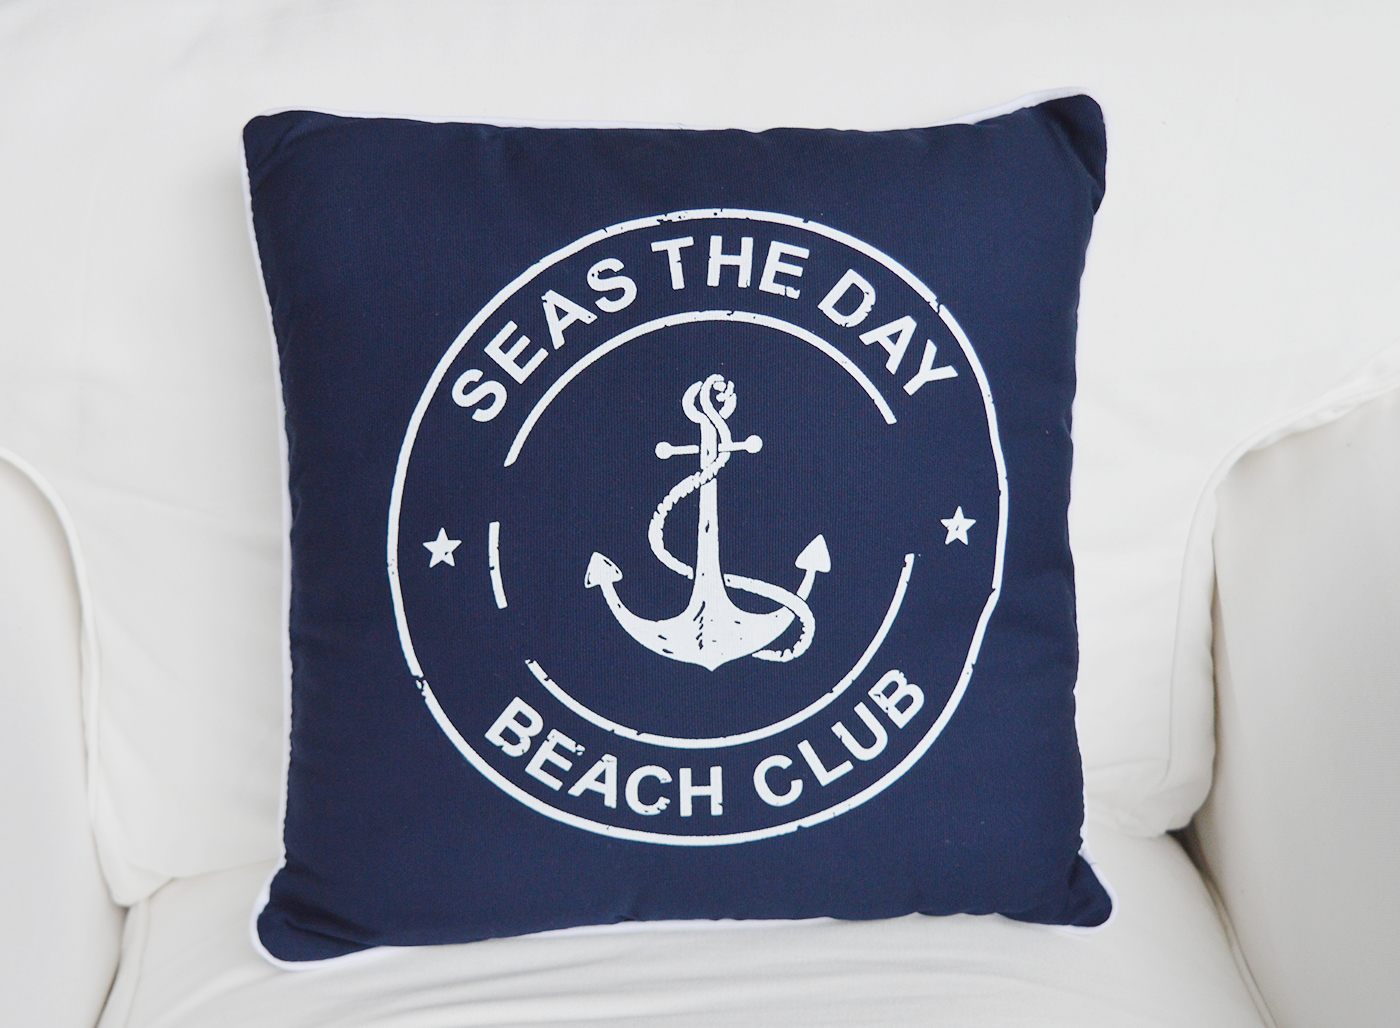 Navy and White Beach Club cushion with inner for coastal New England homes and interiors by the sea